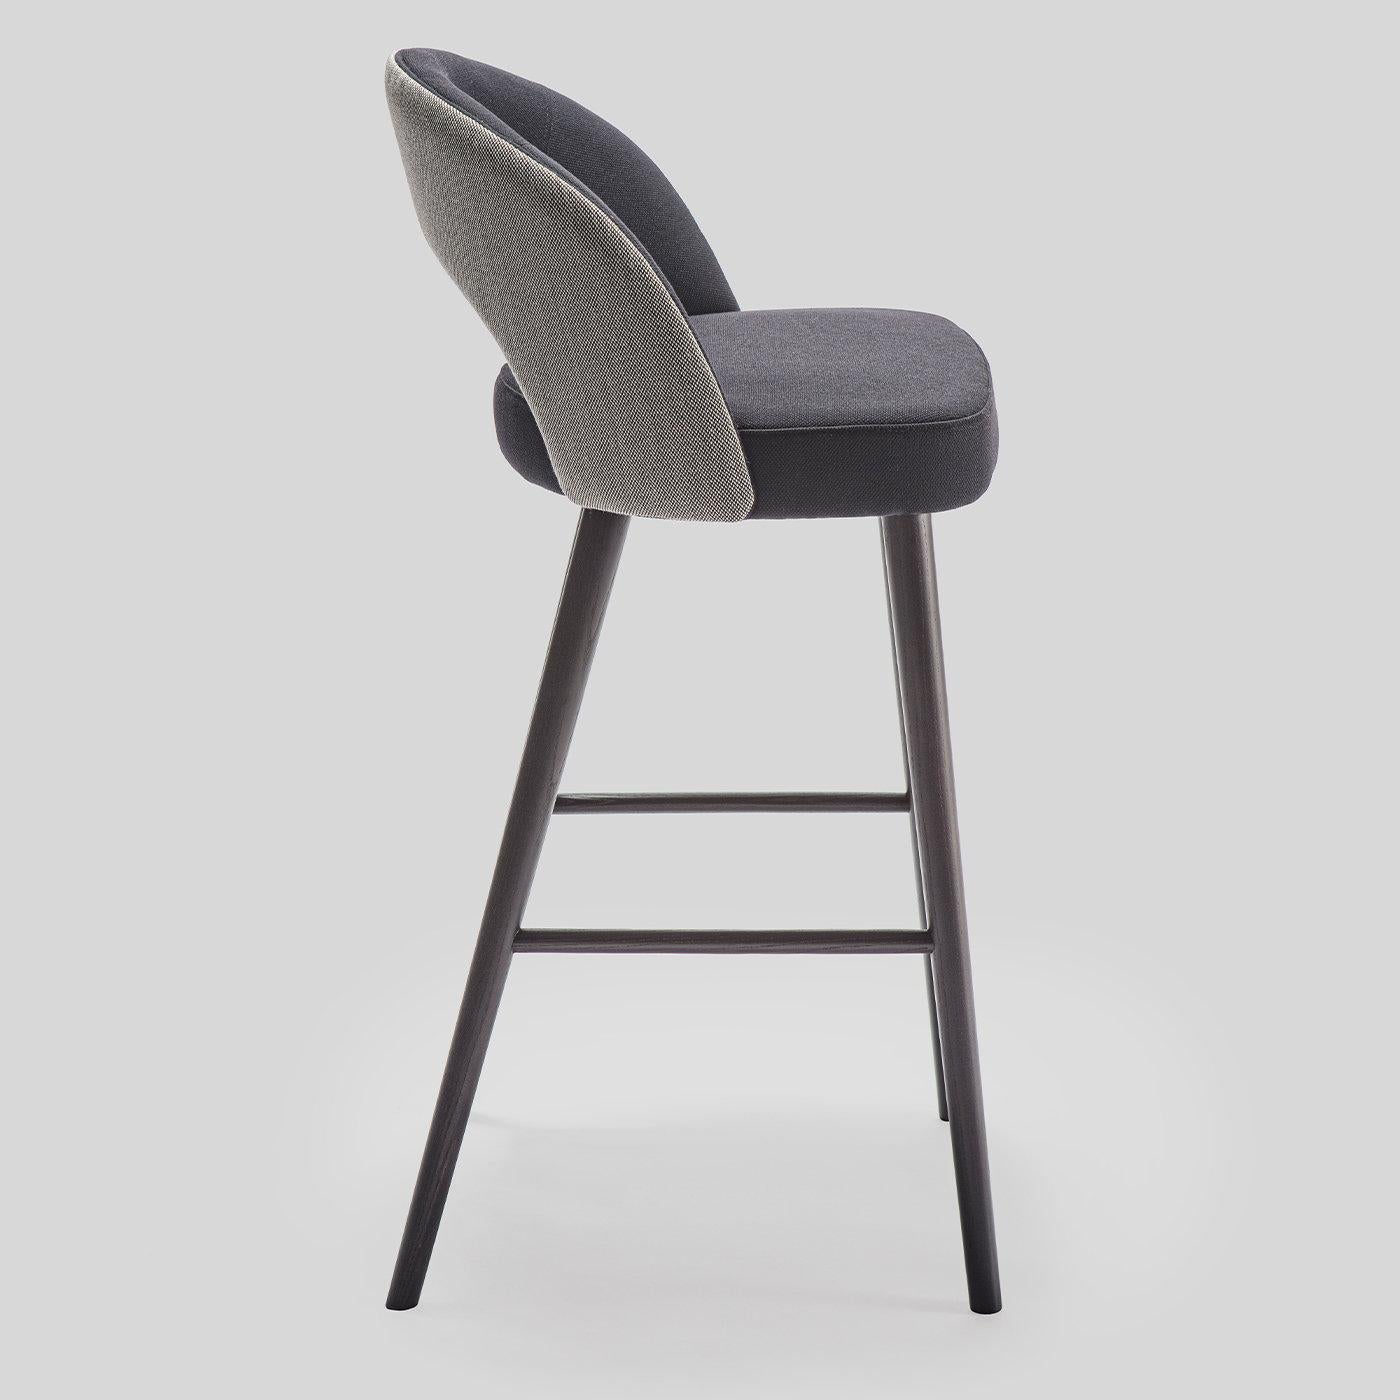 Perfect for pairing with a modern dining room/bar area, this chic stool will infuse elegance into any home. The solid ash wood frame supports an embracing back with a cut-out detail and flows into four tapered legs finished in black. The backrest is